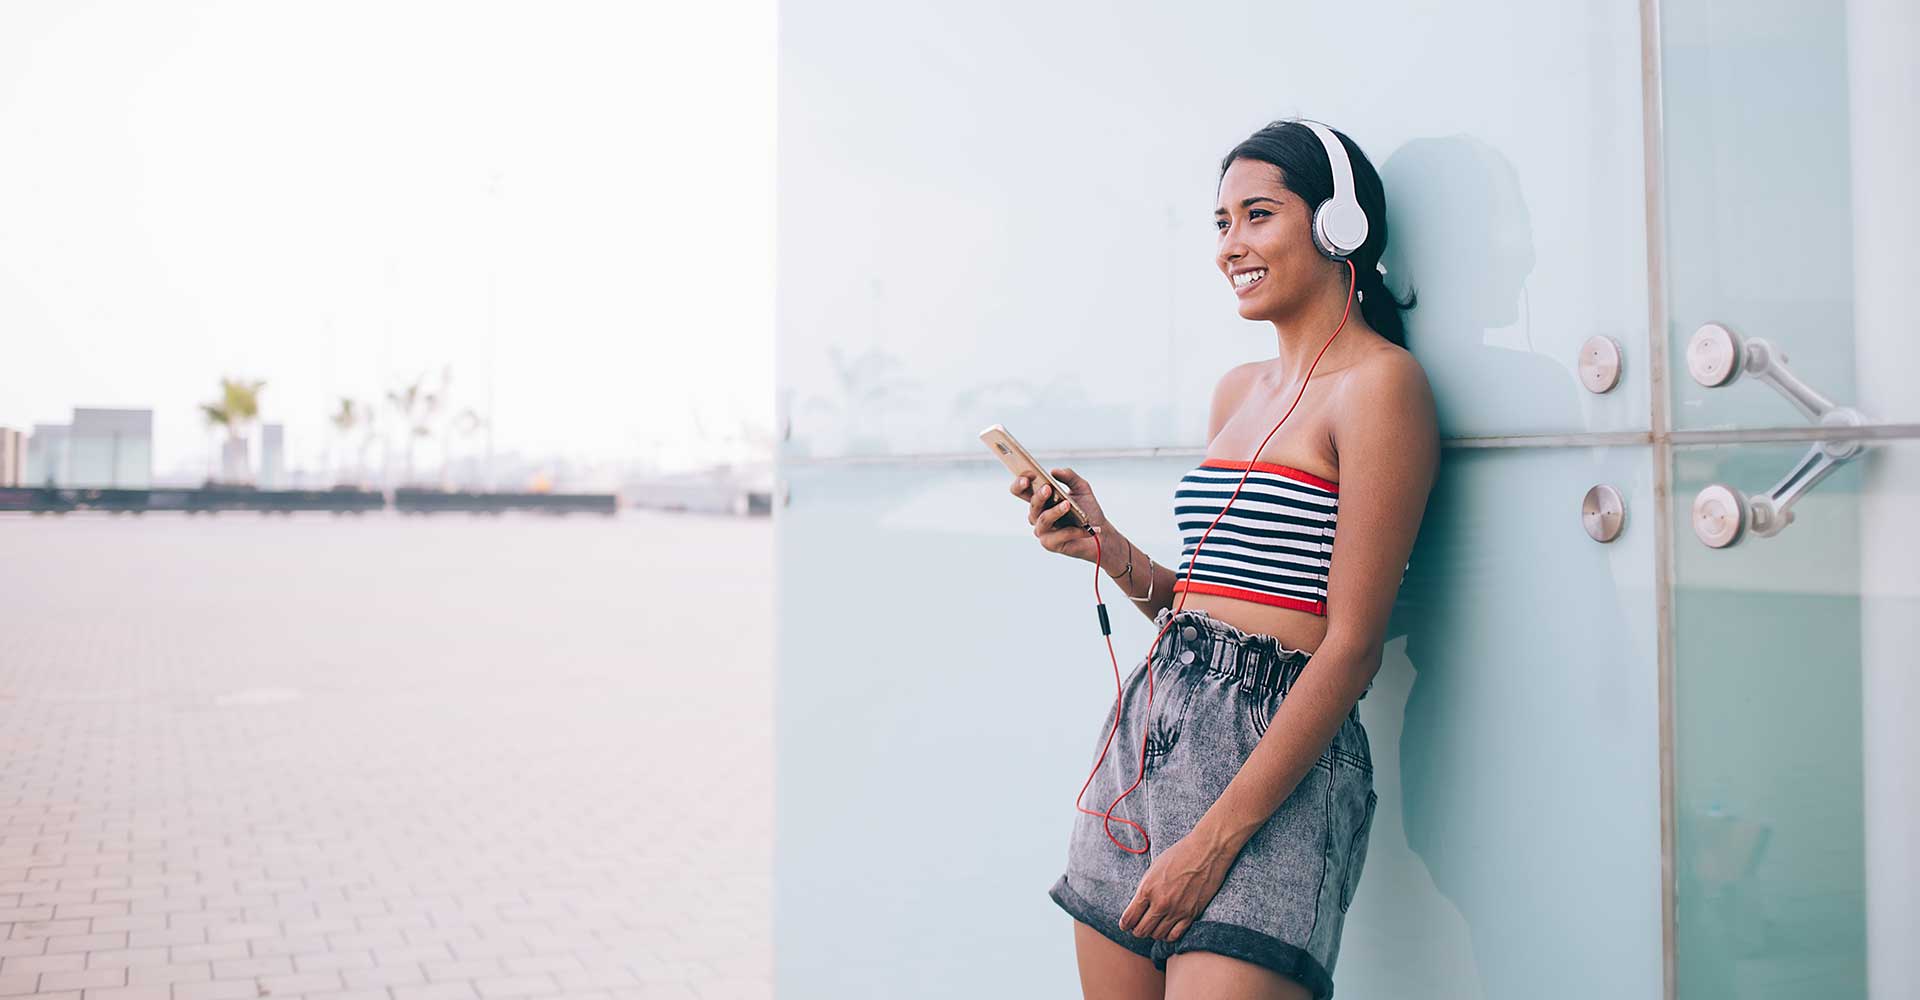 Image with hispanic girl listening to audio content on the go with smartphone and headset